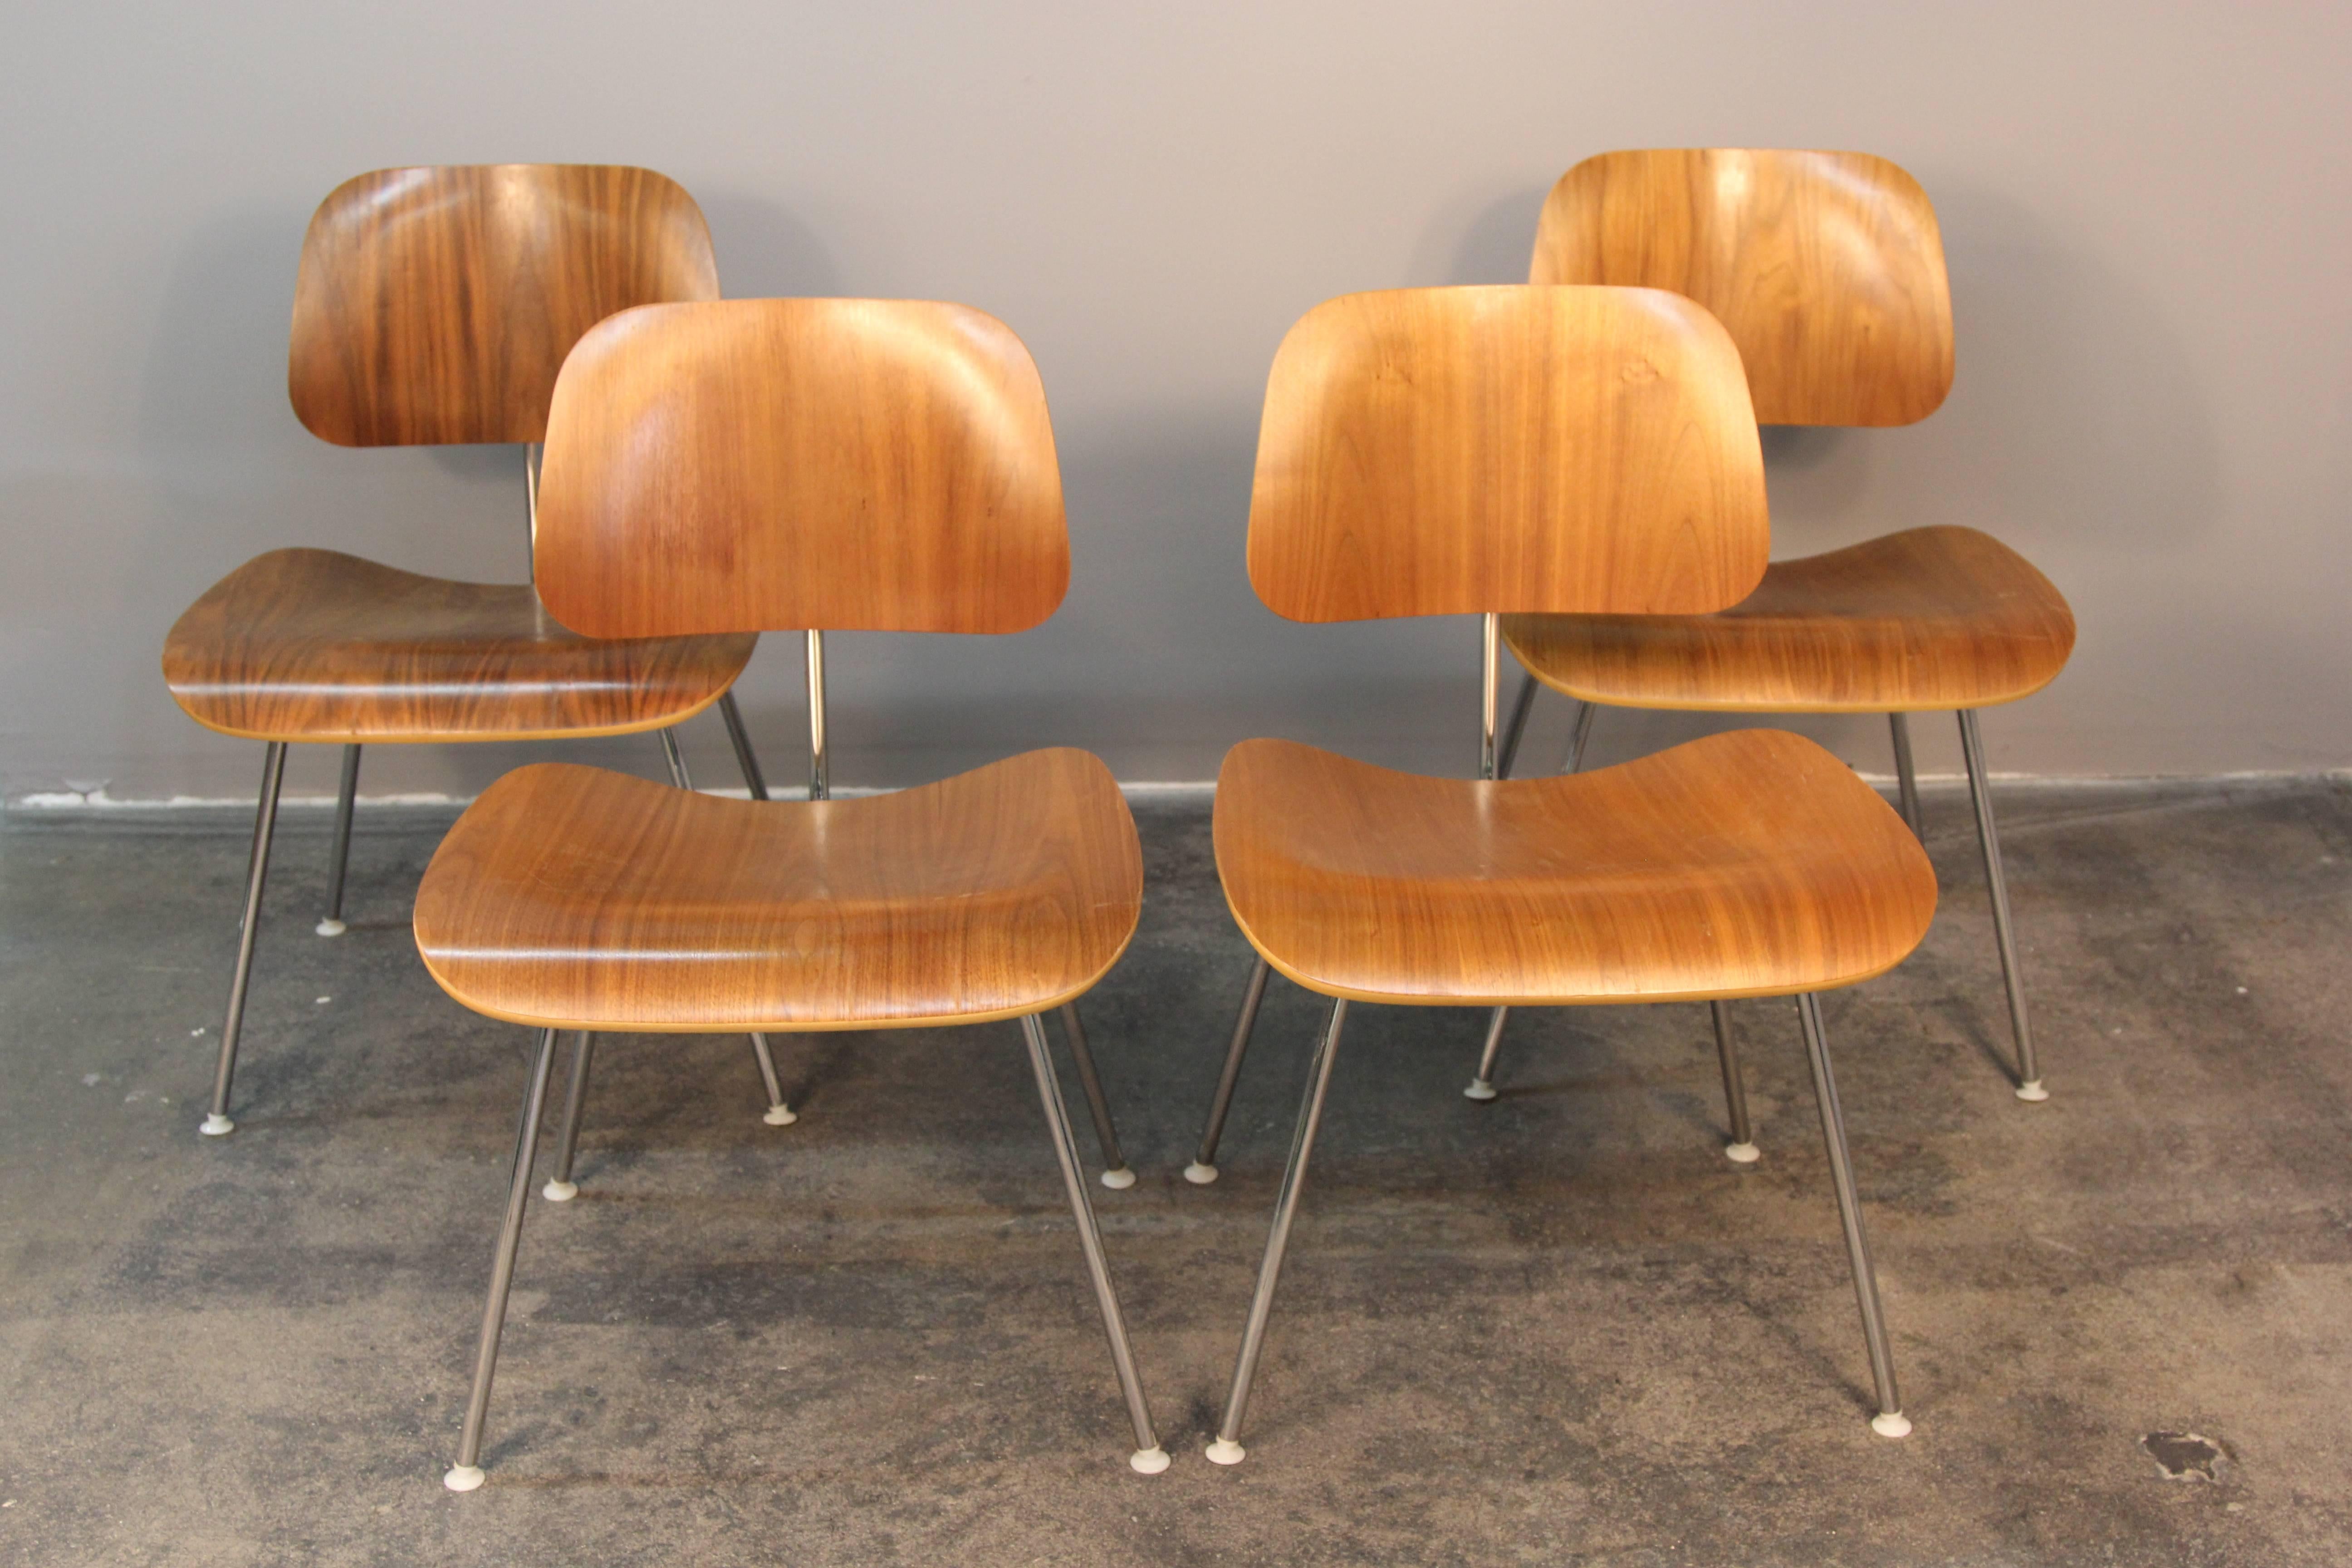 Incredible condition, set of four Eames DCM chairs. An iconic style for any environment.